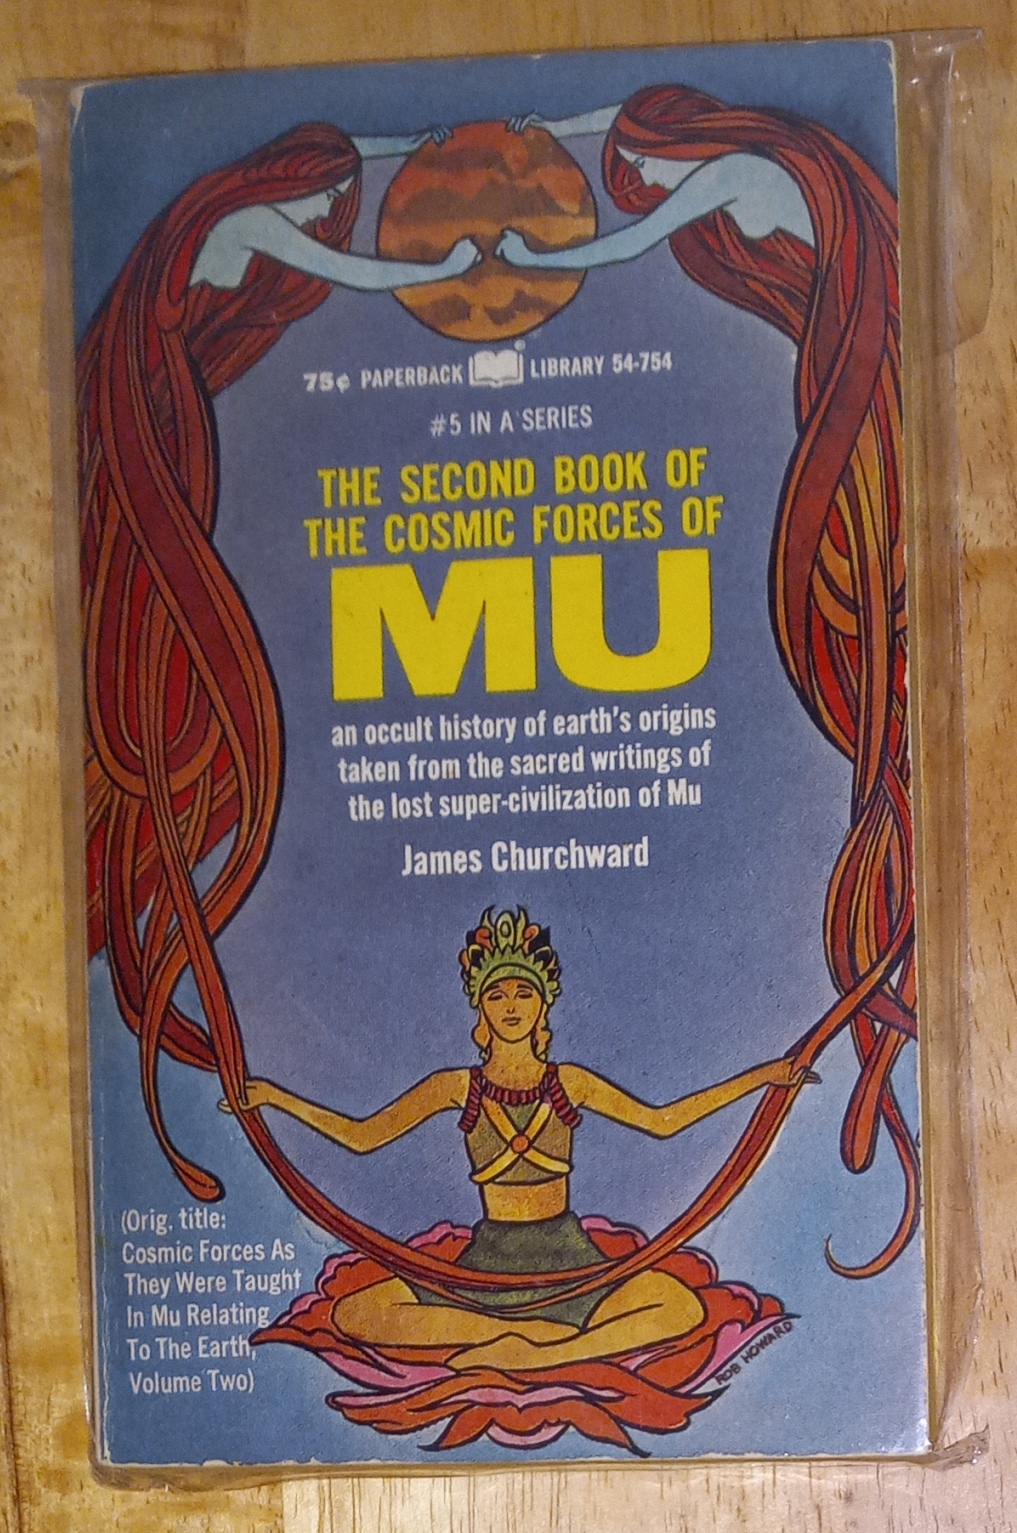 The Second Book of the Cosmic Forces of Mu by James Churchward